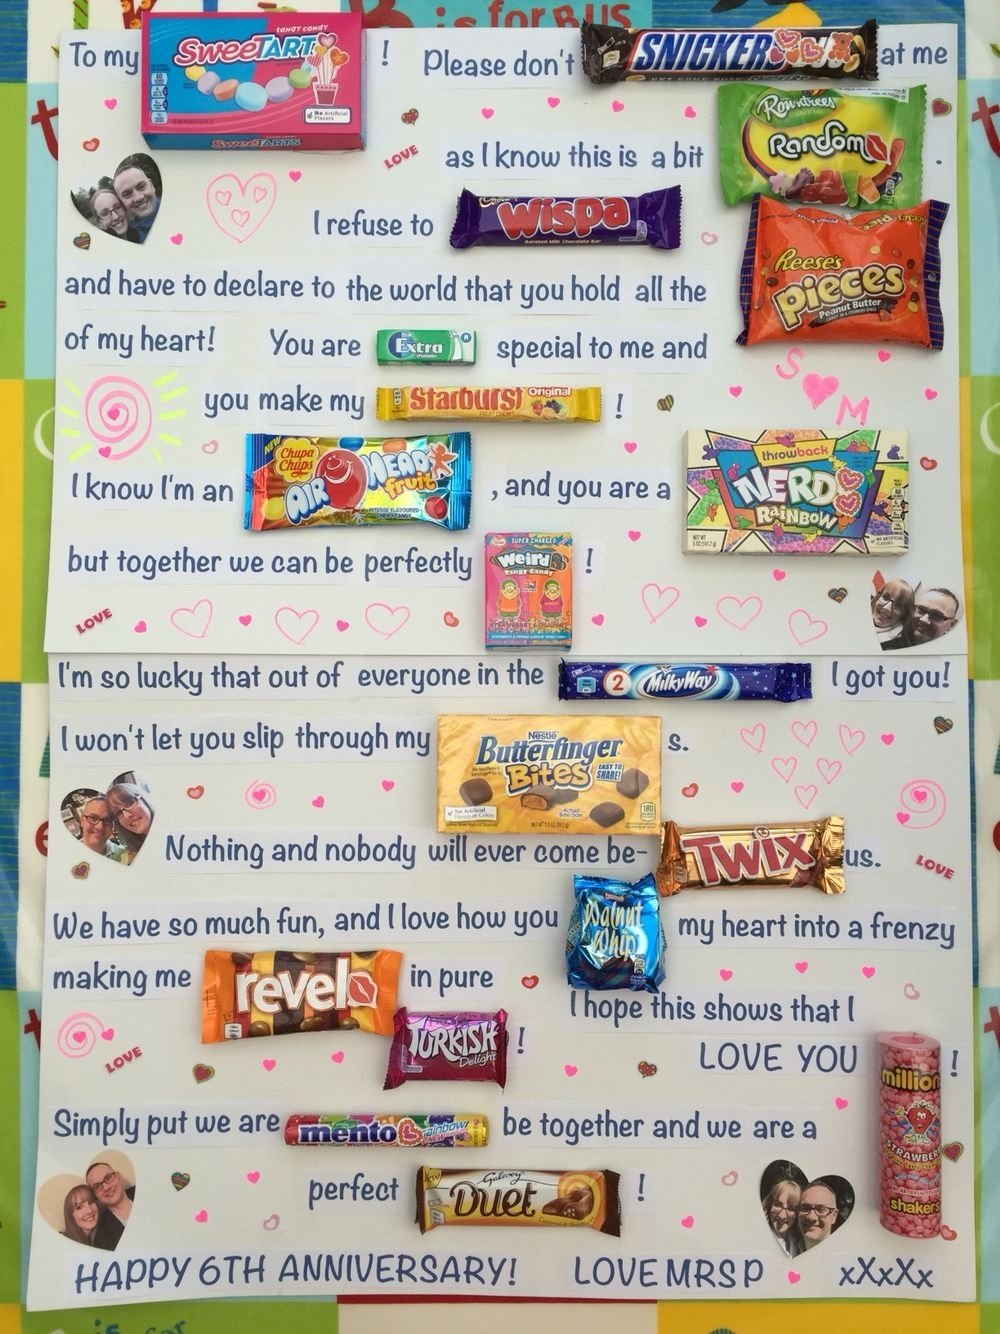 10 Gorgeous 6 Year Anniversary Gift Ideas candy poster board for our 6 year wedding anniversary gift ideas 2022